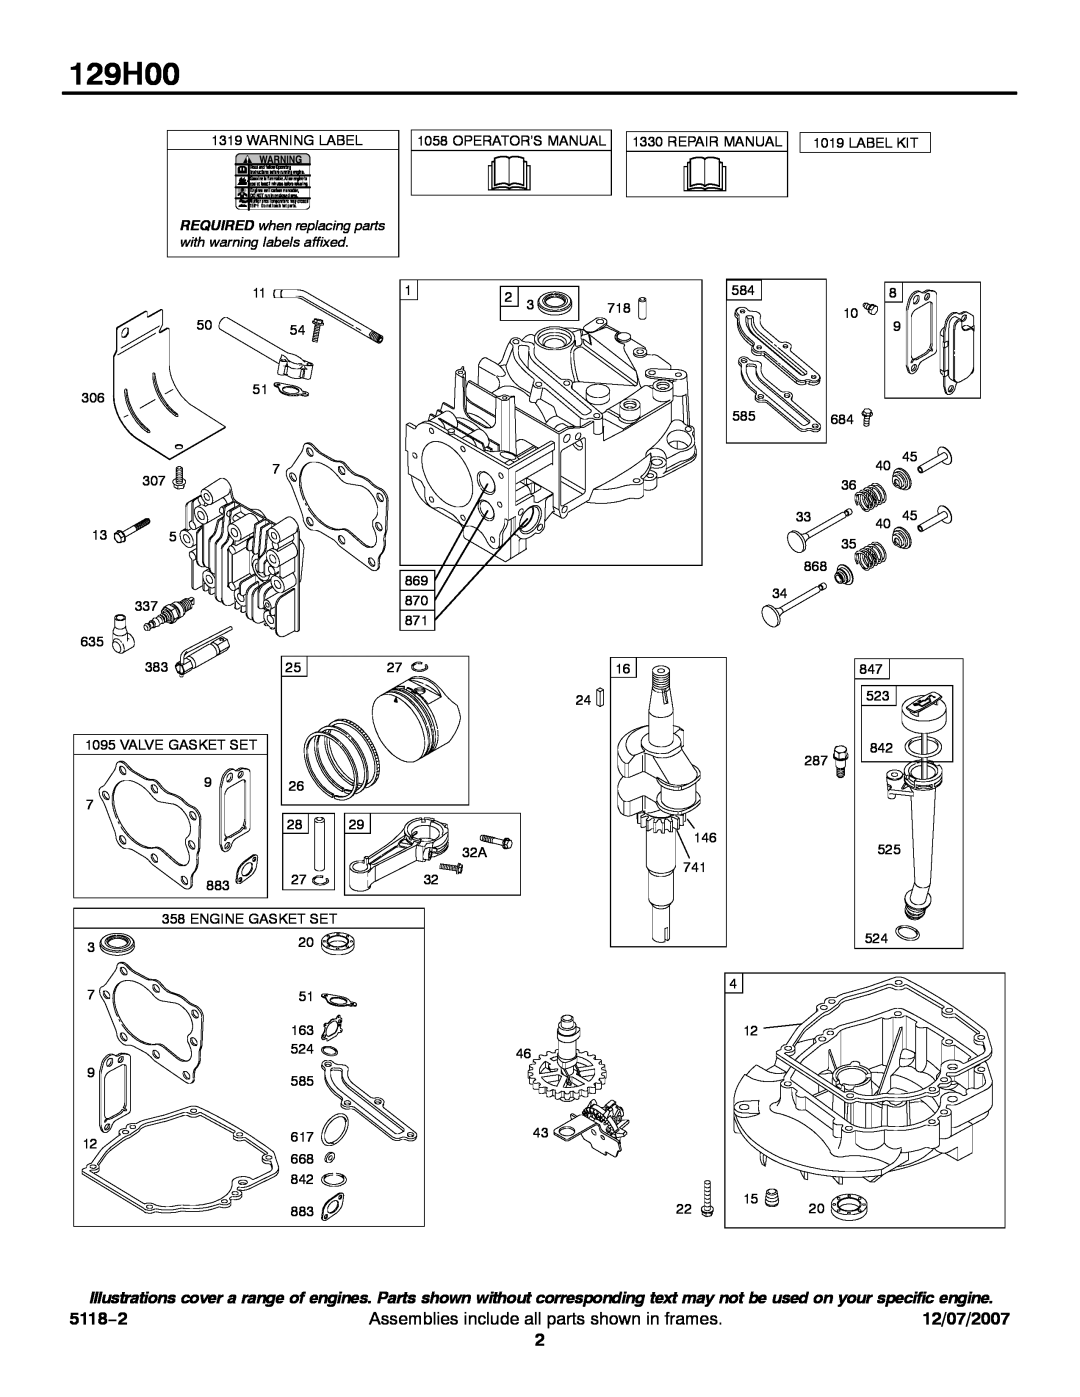 Briggs & Stratton 129H00 service manual 5118−2, Assemblies include all parts shown in frames, 12/07/2007 